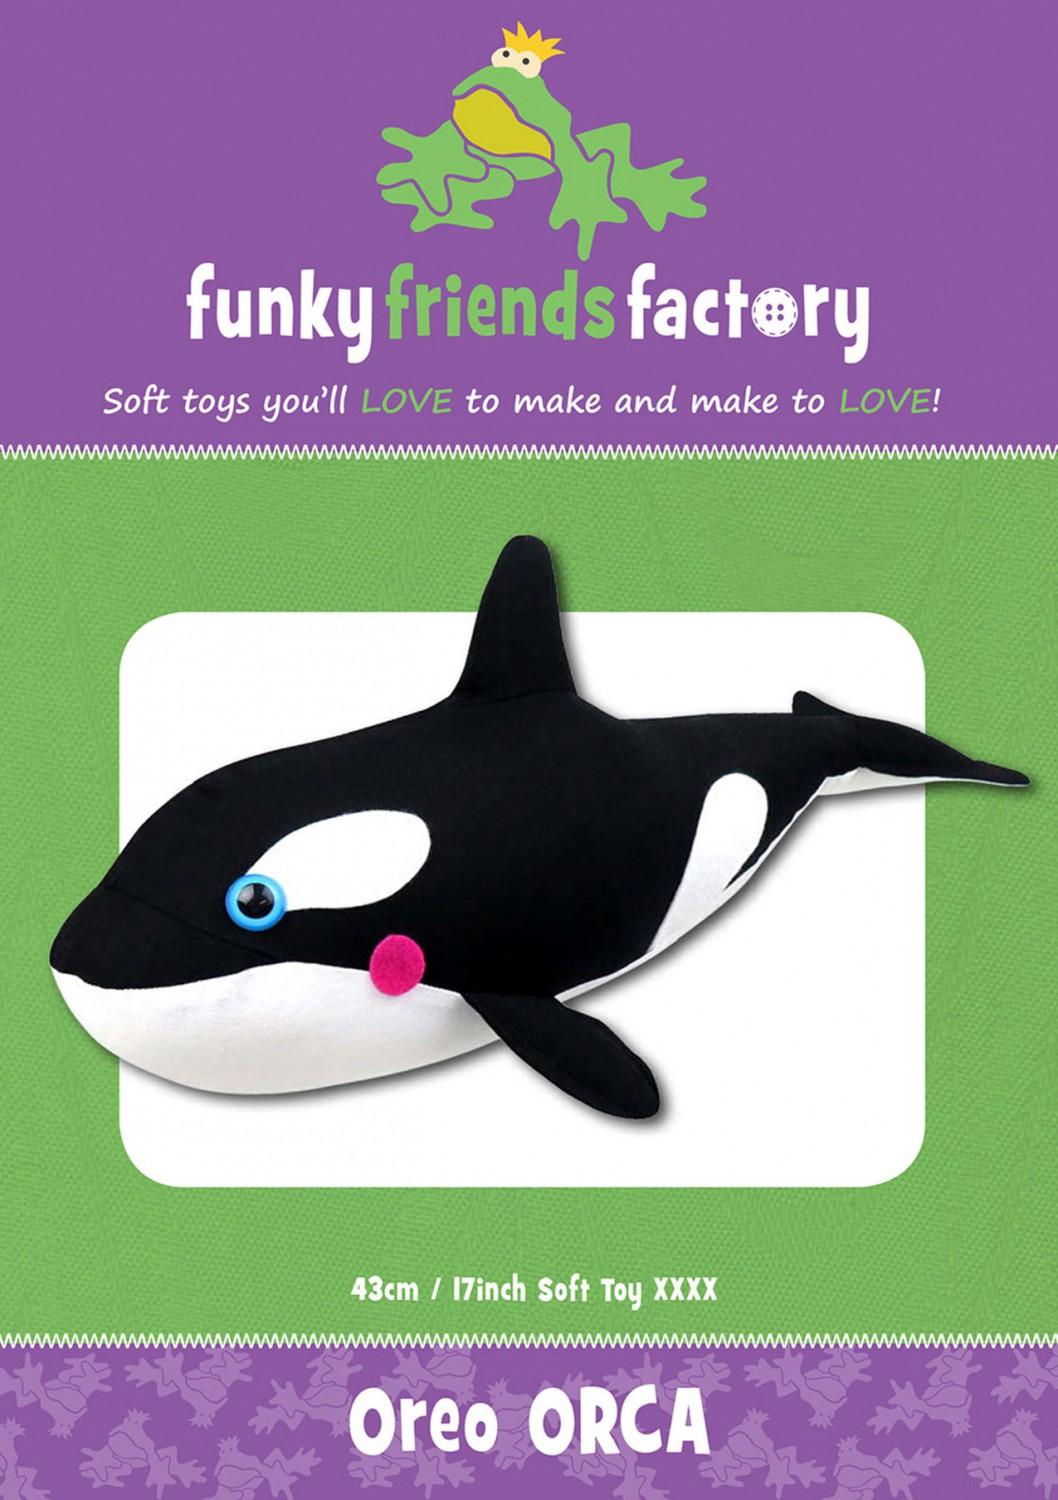 Oree Orca  Funky Friends Factory